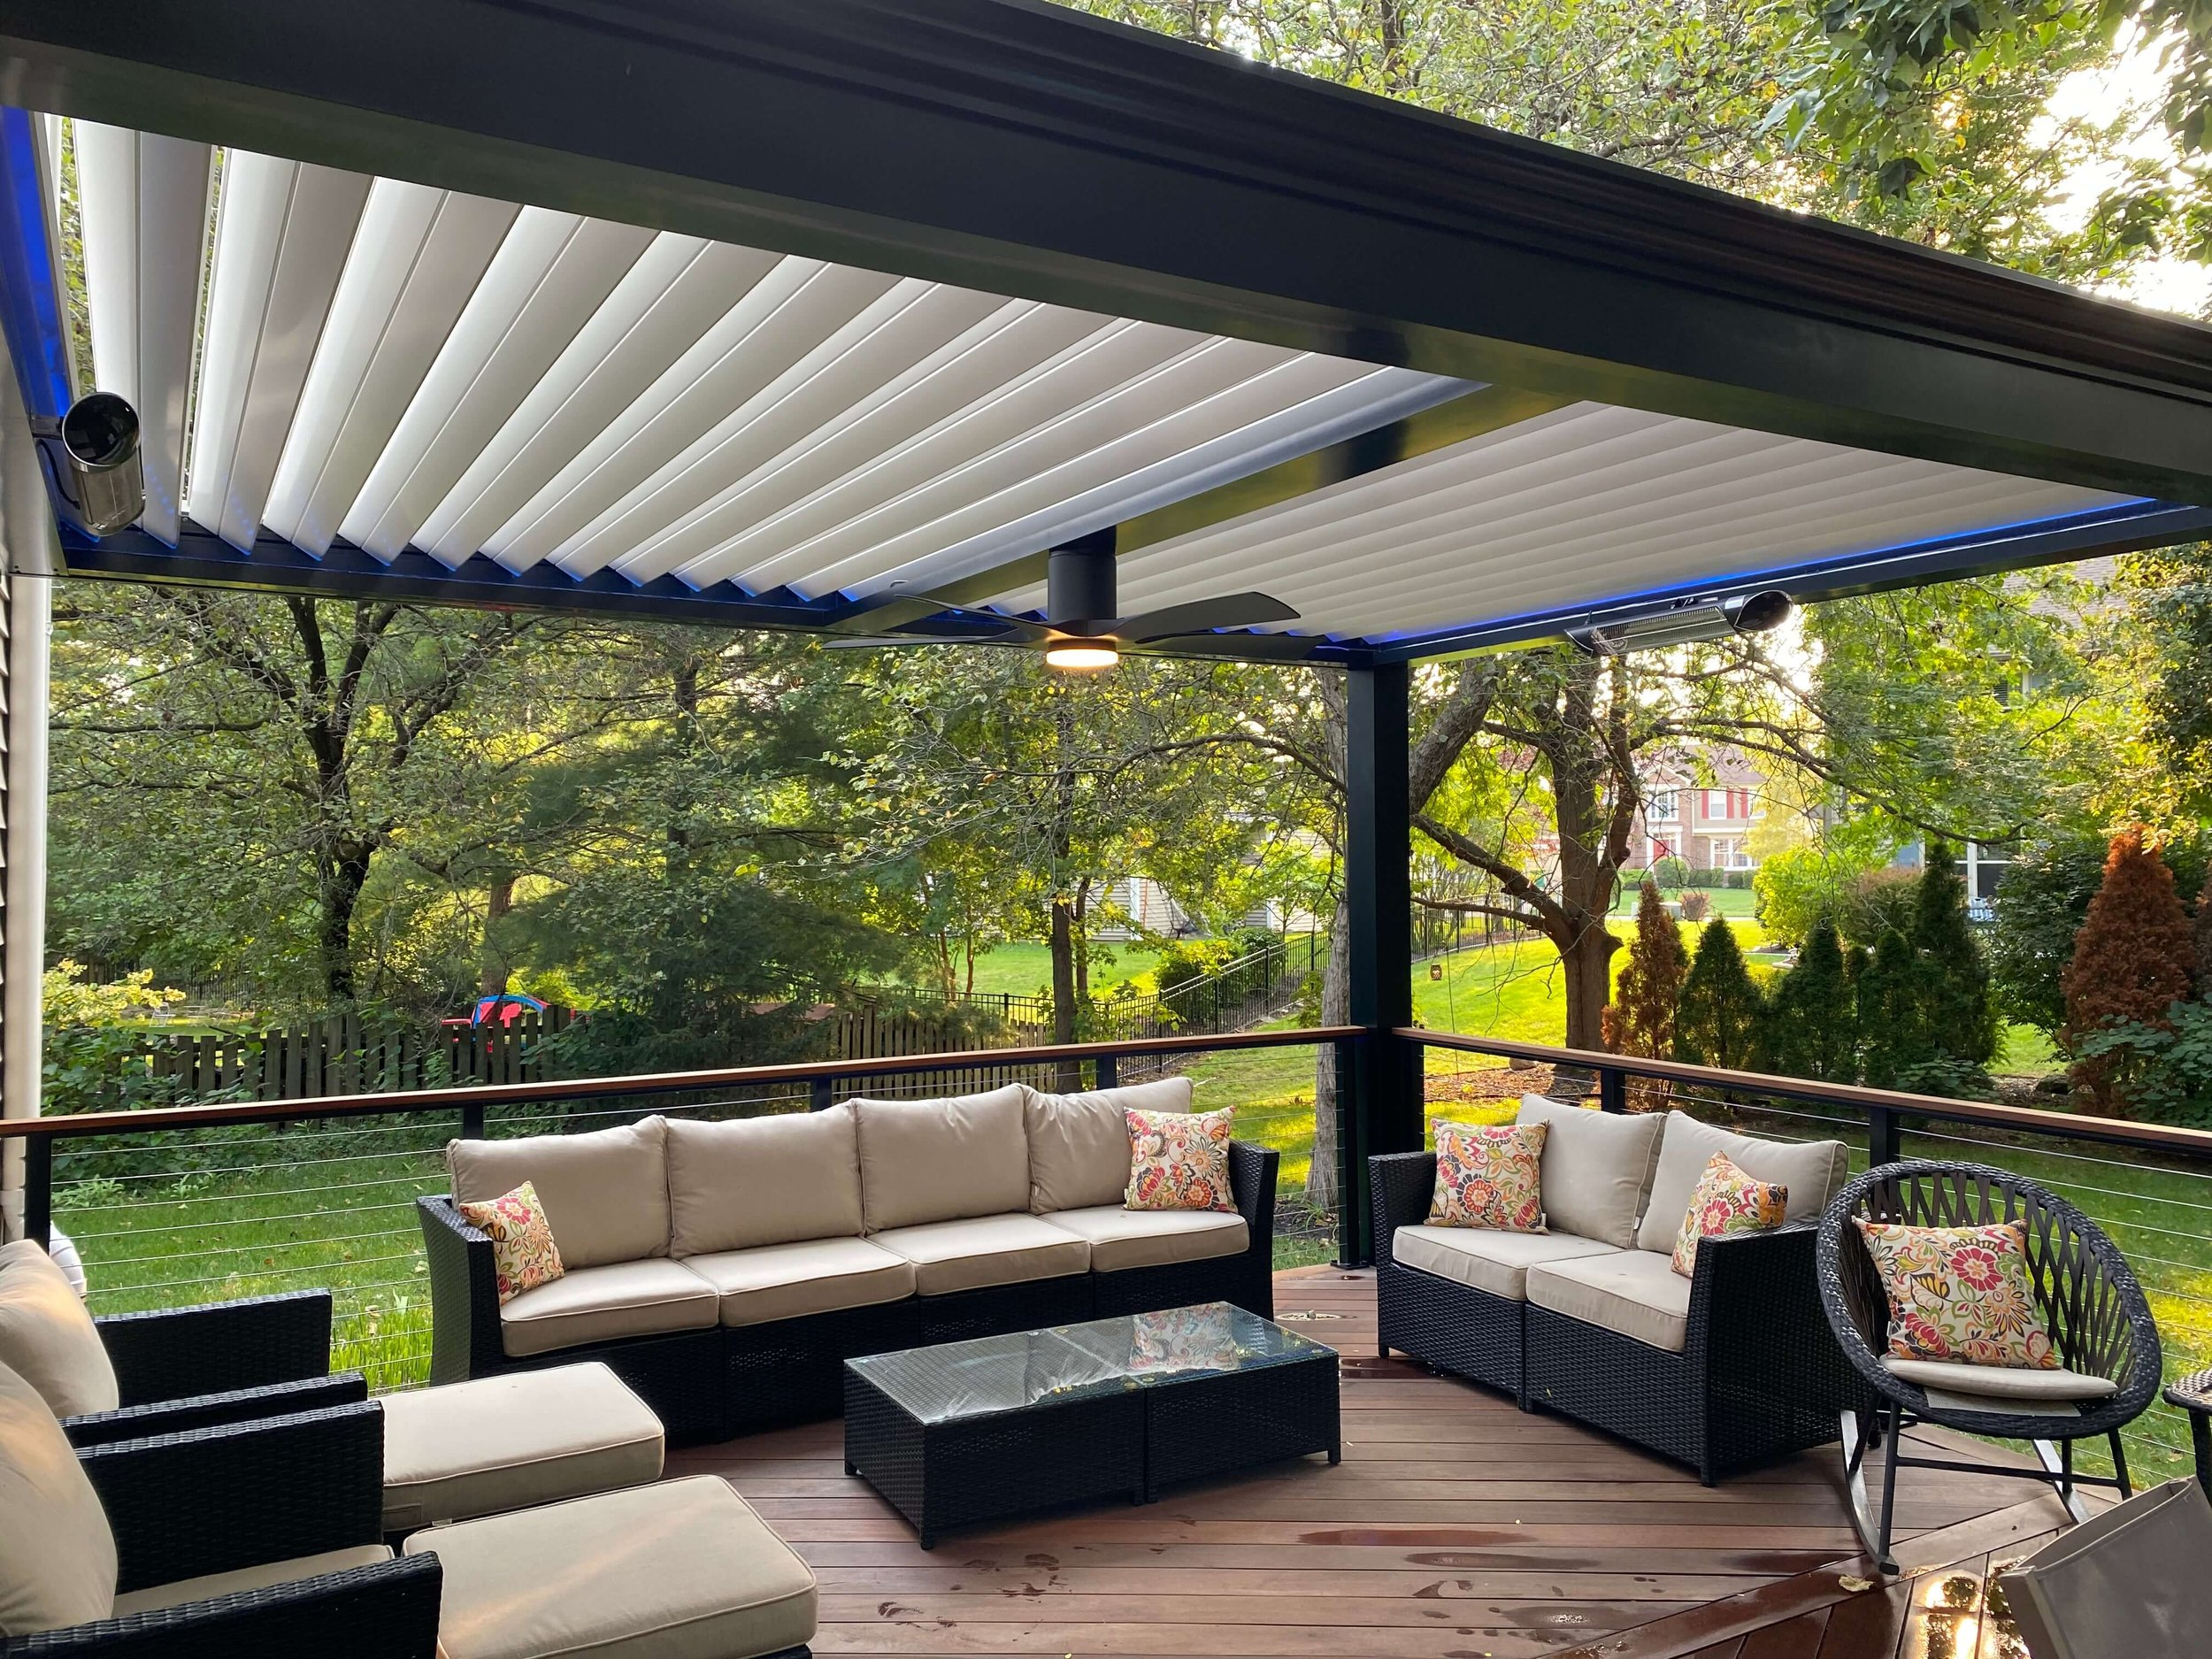 Pool Deck Pergola In Black With Outdoor Dining Area